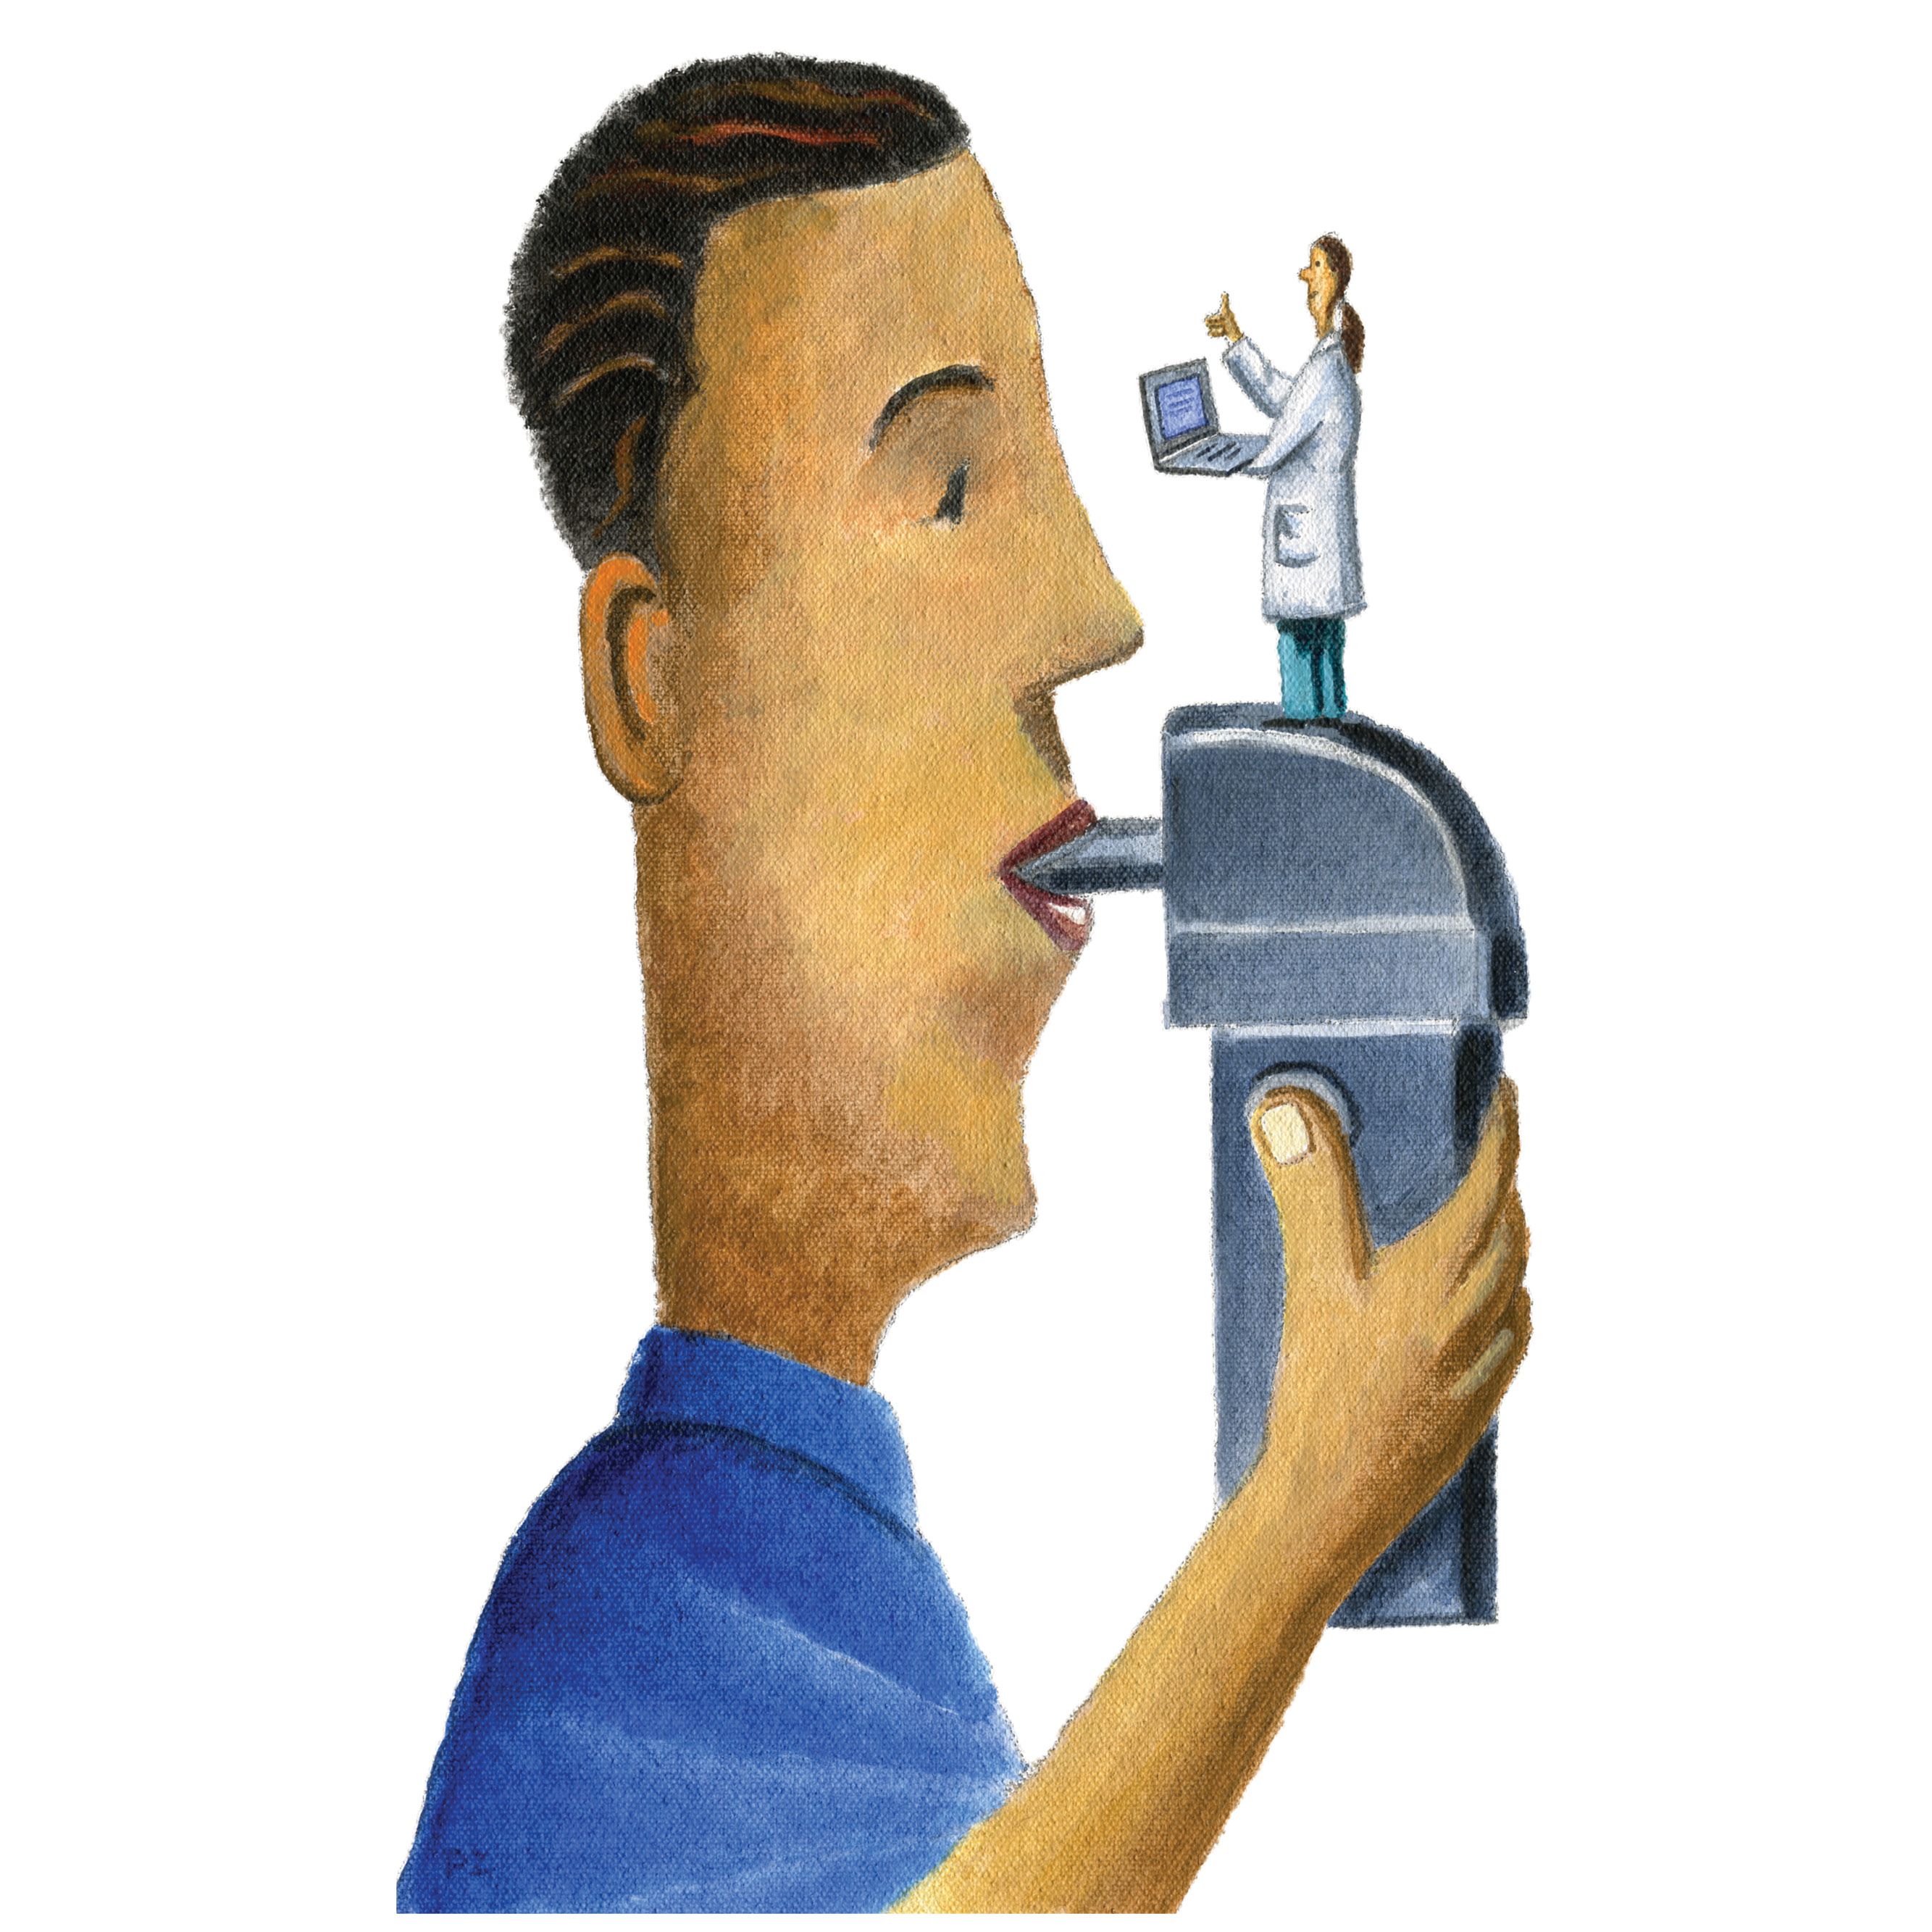 Illustration of a man holding a device in his mouth with a tiny doctor standing on top of it.